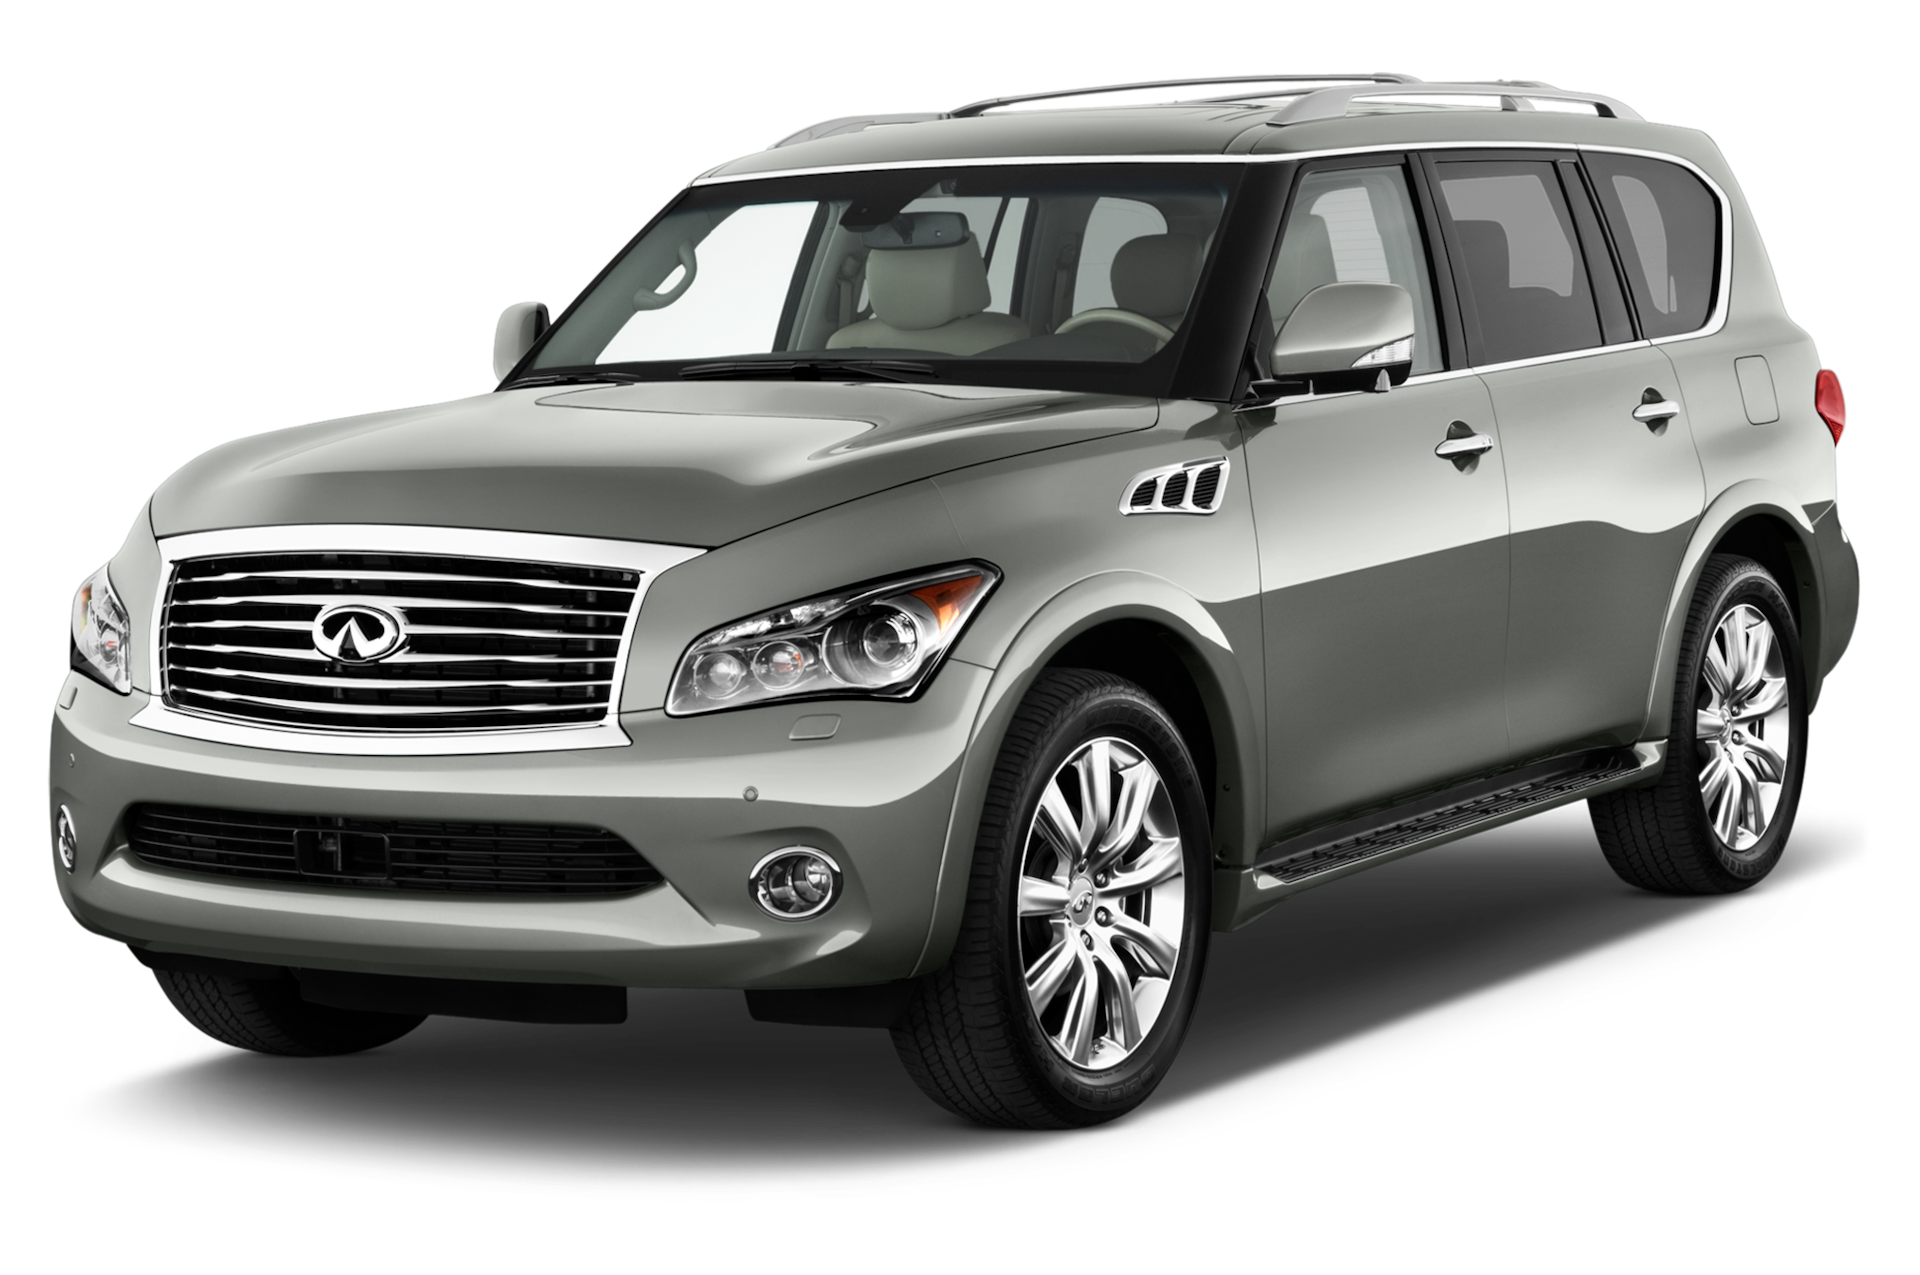 2013 Infiniti QX56 Prices, Reviews, and Photos - MotorTrend